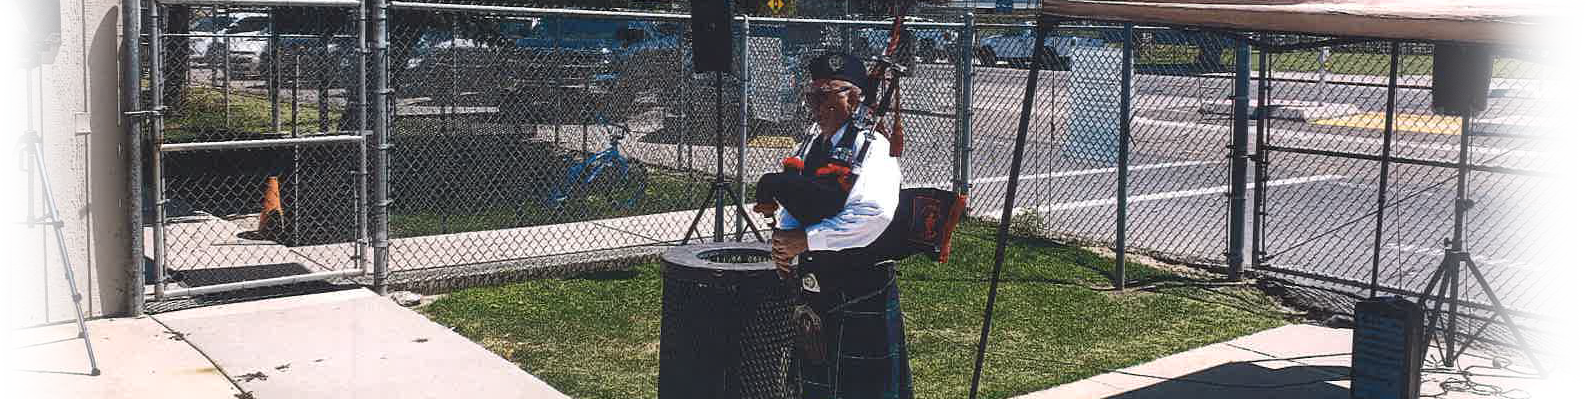 Man playing the bagpipes